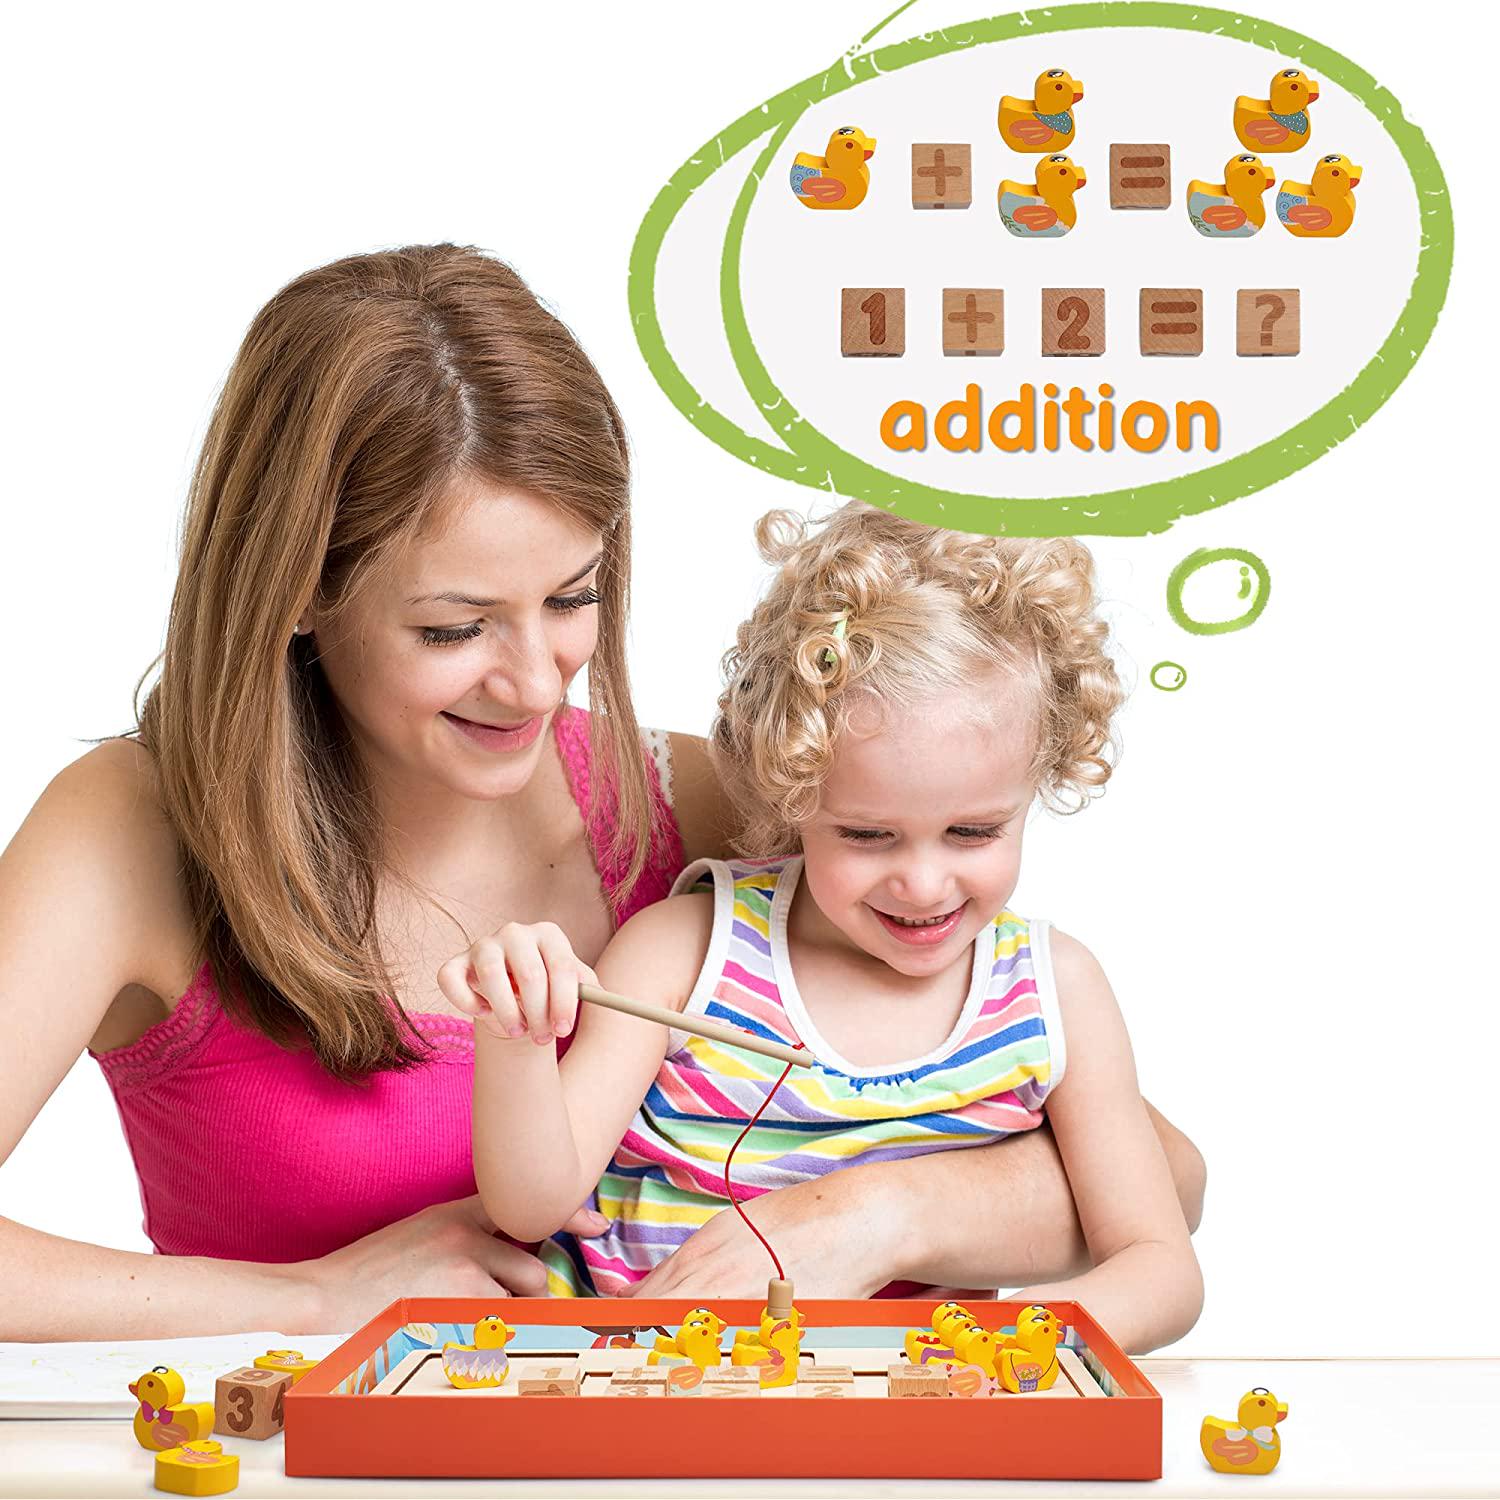 LiKee, LiKee Math Number Addition& Subtraction Games Counting Puzzles Preschool Educational Montessori Kindergarten Sorting Toys Learning Activity for Teacher, Kids Boys Toddlers 3+ Years Old